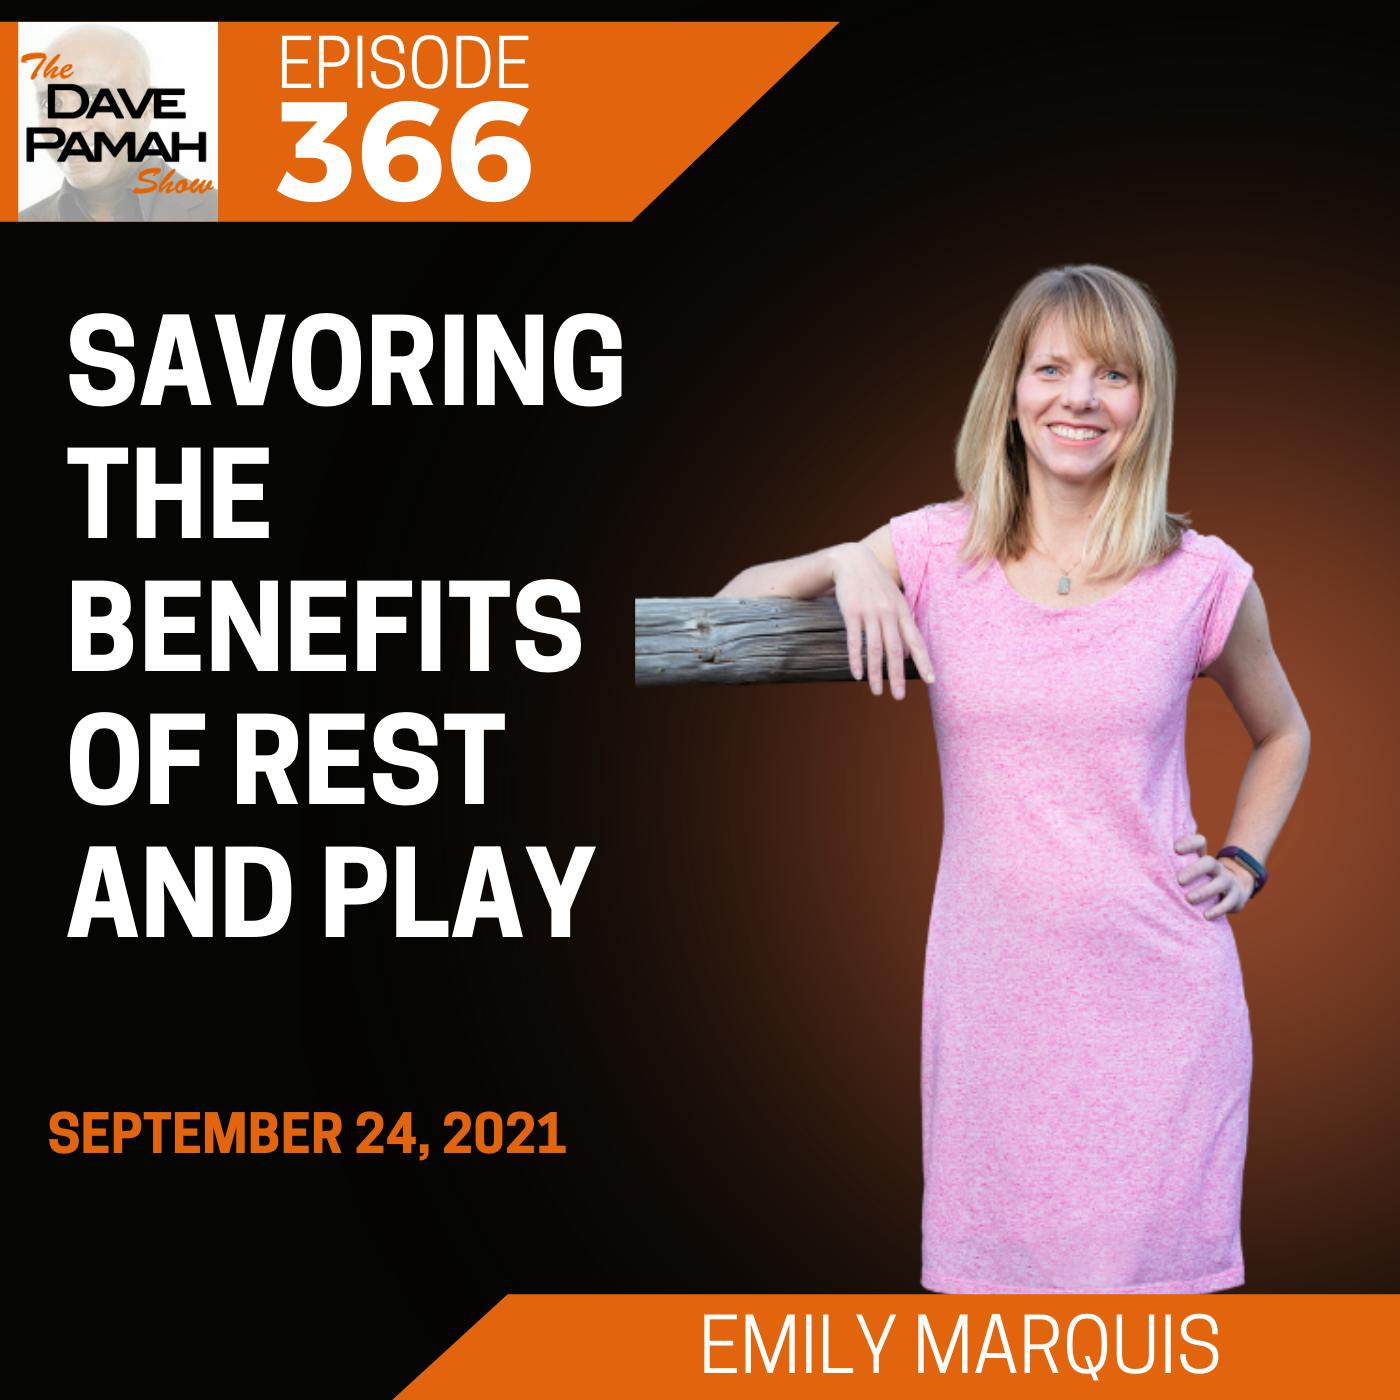 Savoring the Benefits of Rest and Play with Emily Marquis